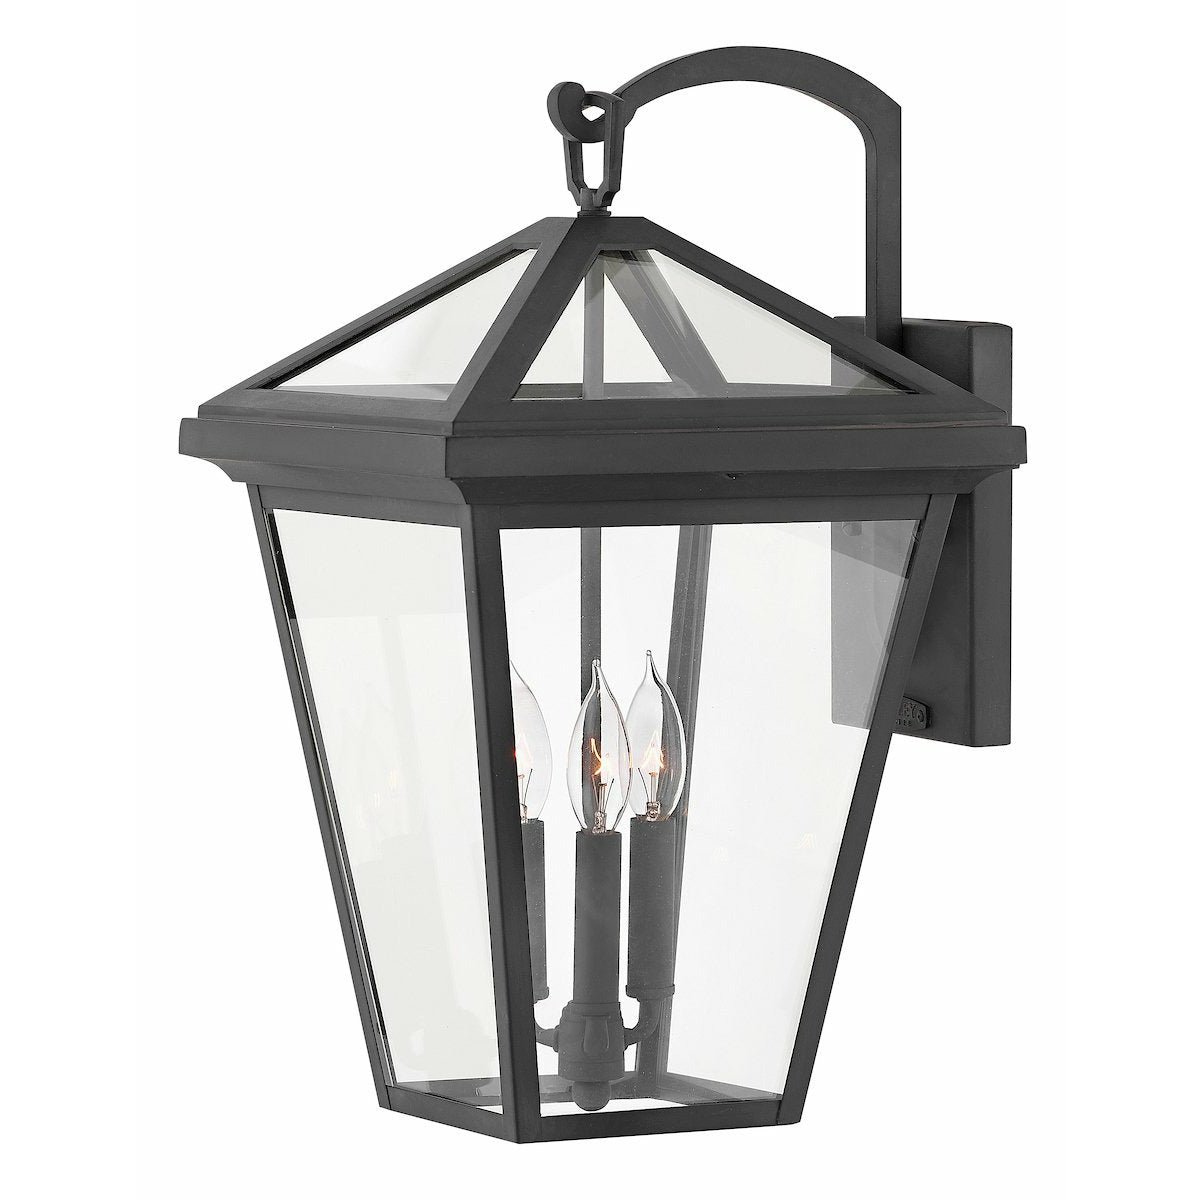 Alford Place Outdoor Wall Light Museum Black